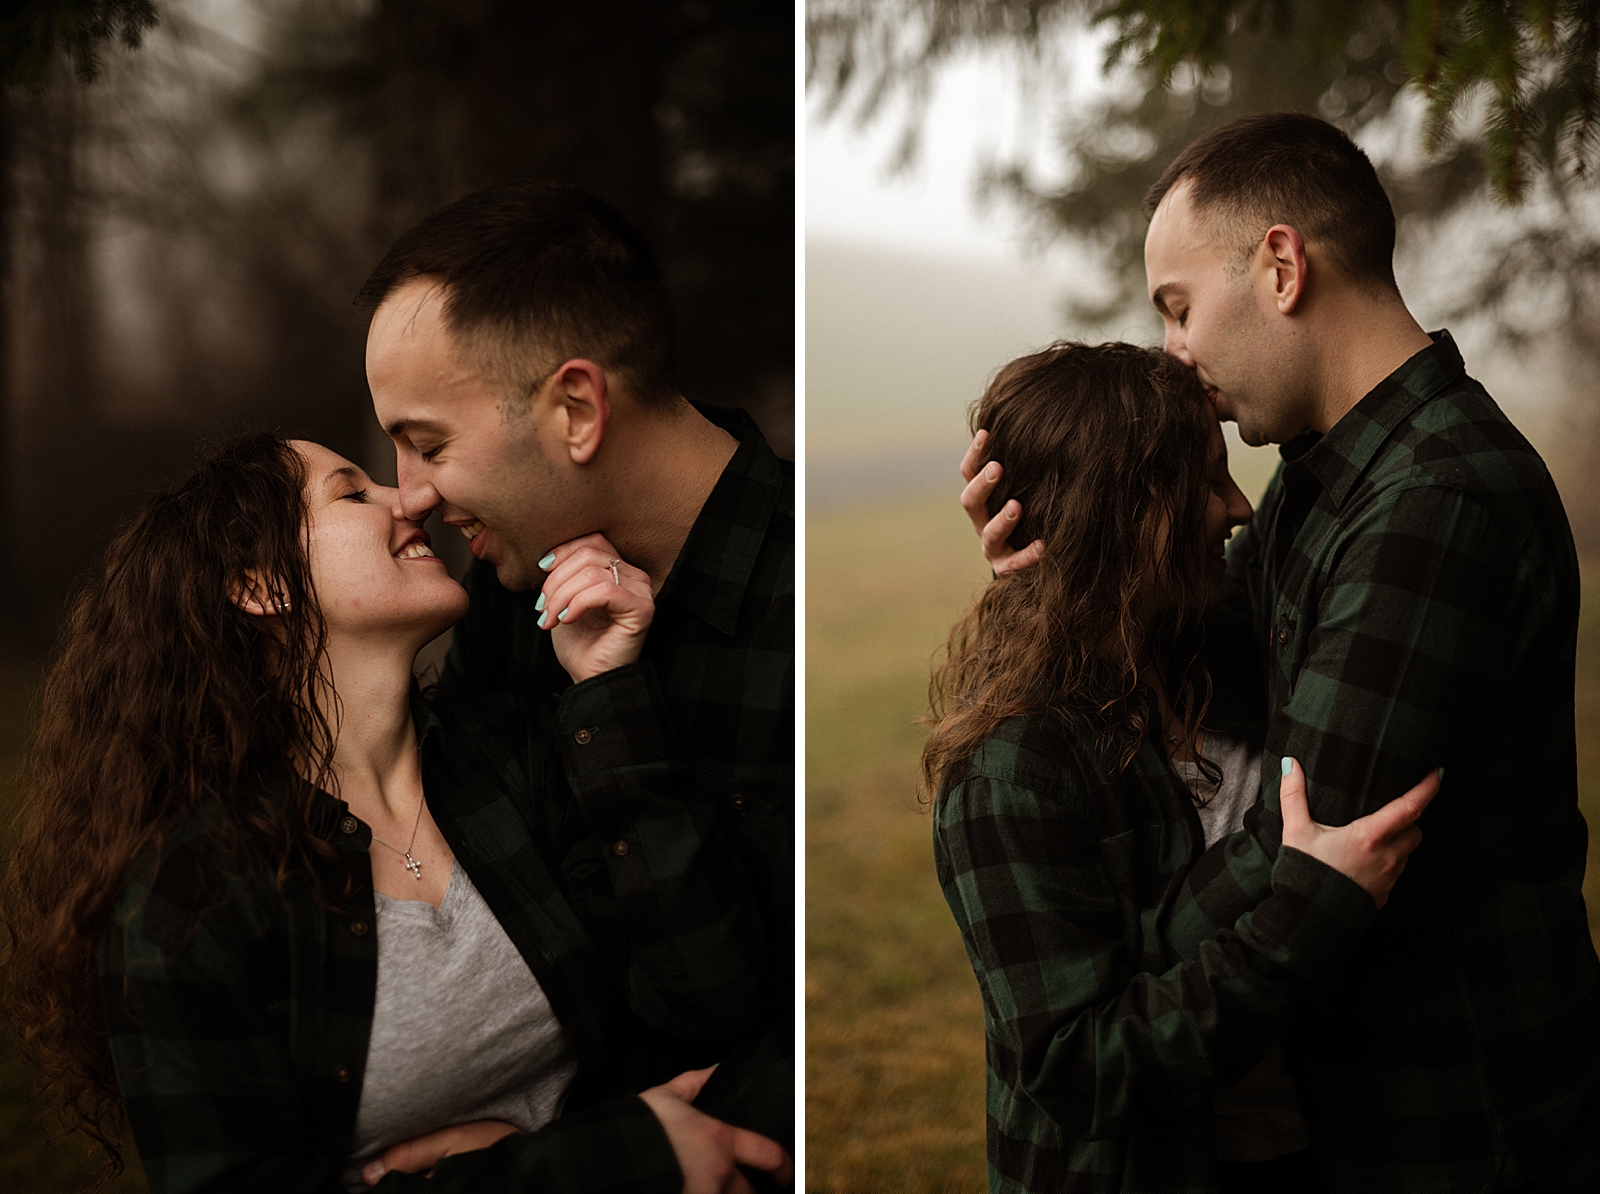 Couple leaning in to kiss in dark forest